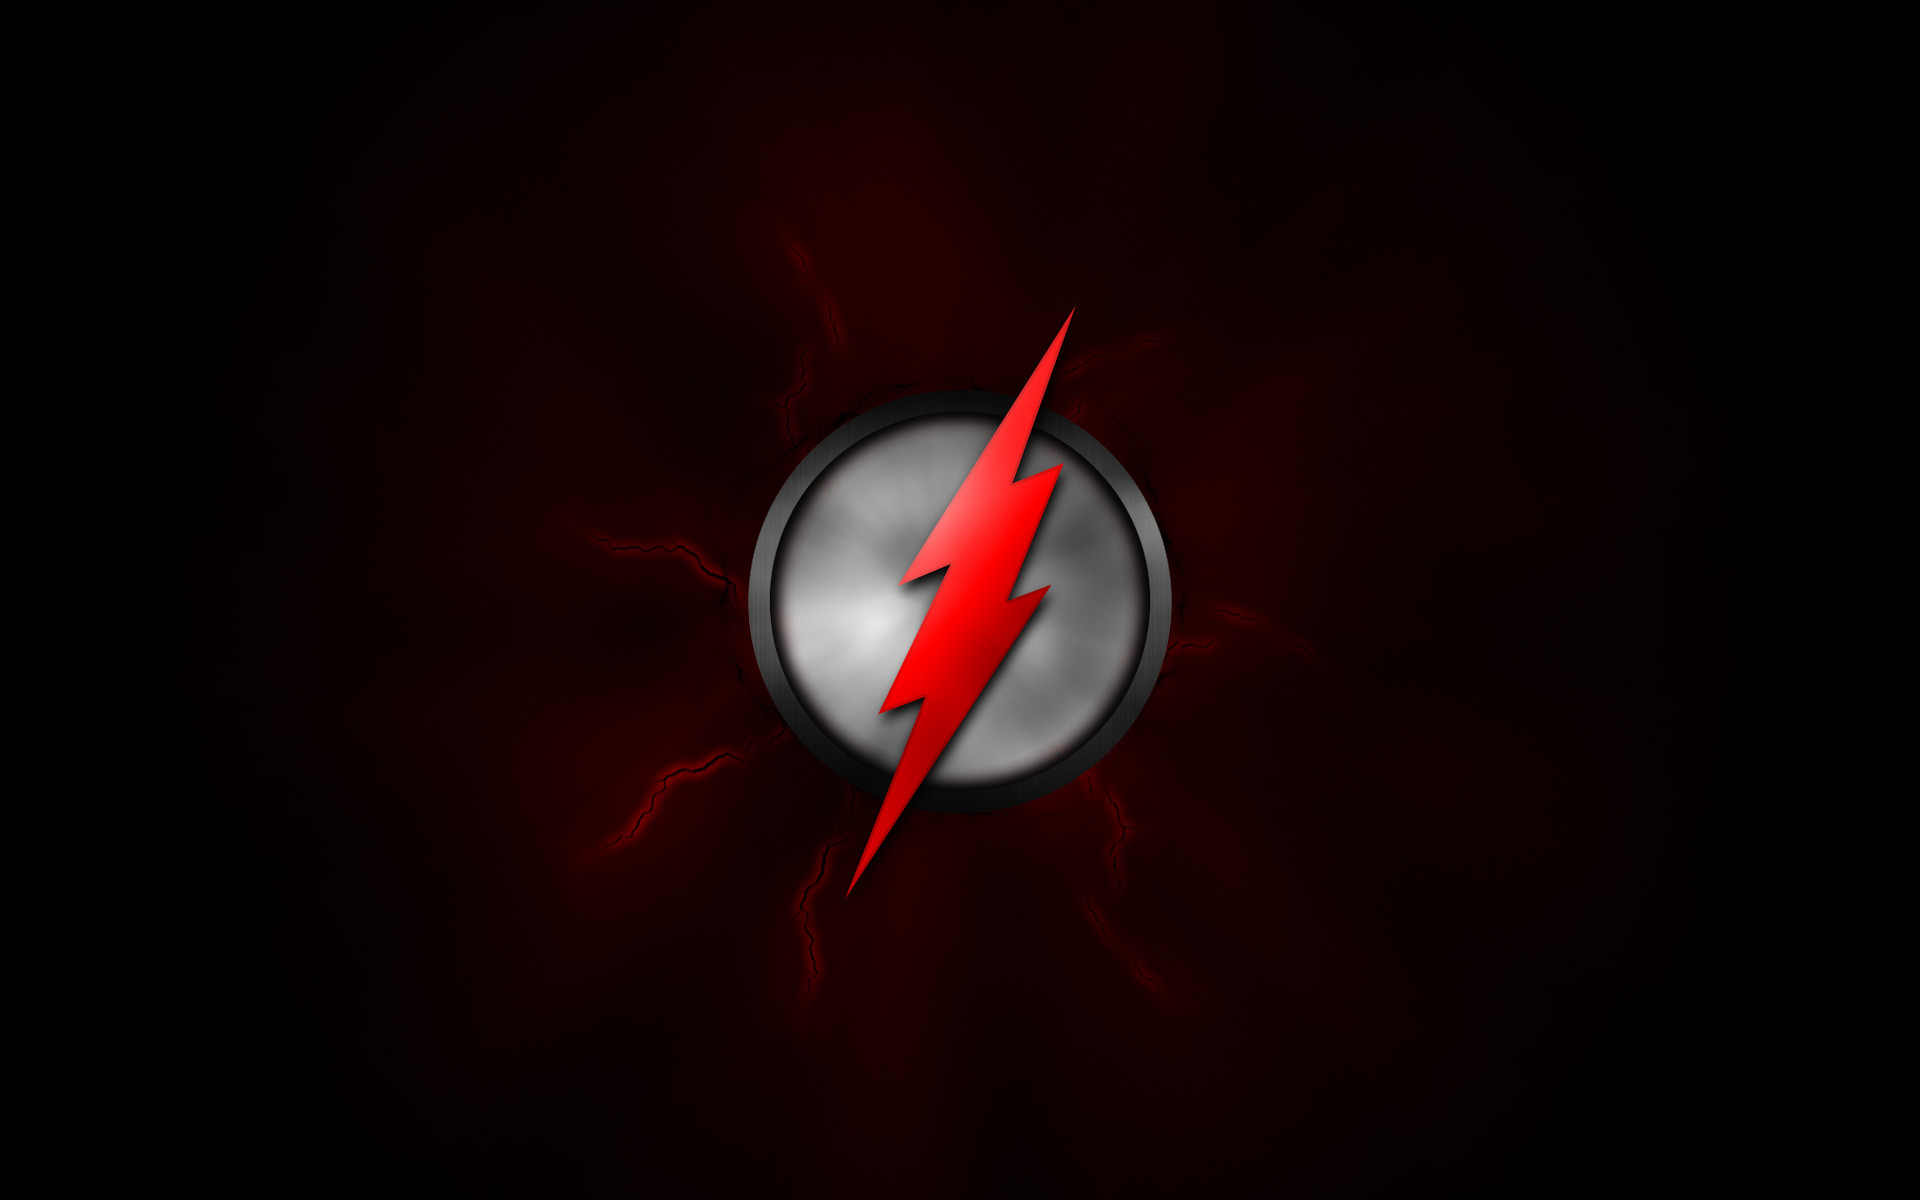 Free The Flash Wallpaper Downloads 200 The Flash Wallpapers for FREE   Wallpaperscom